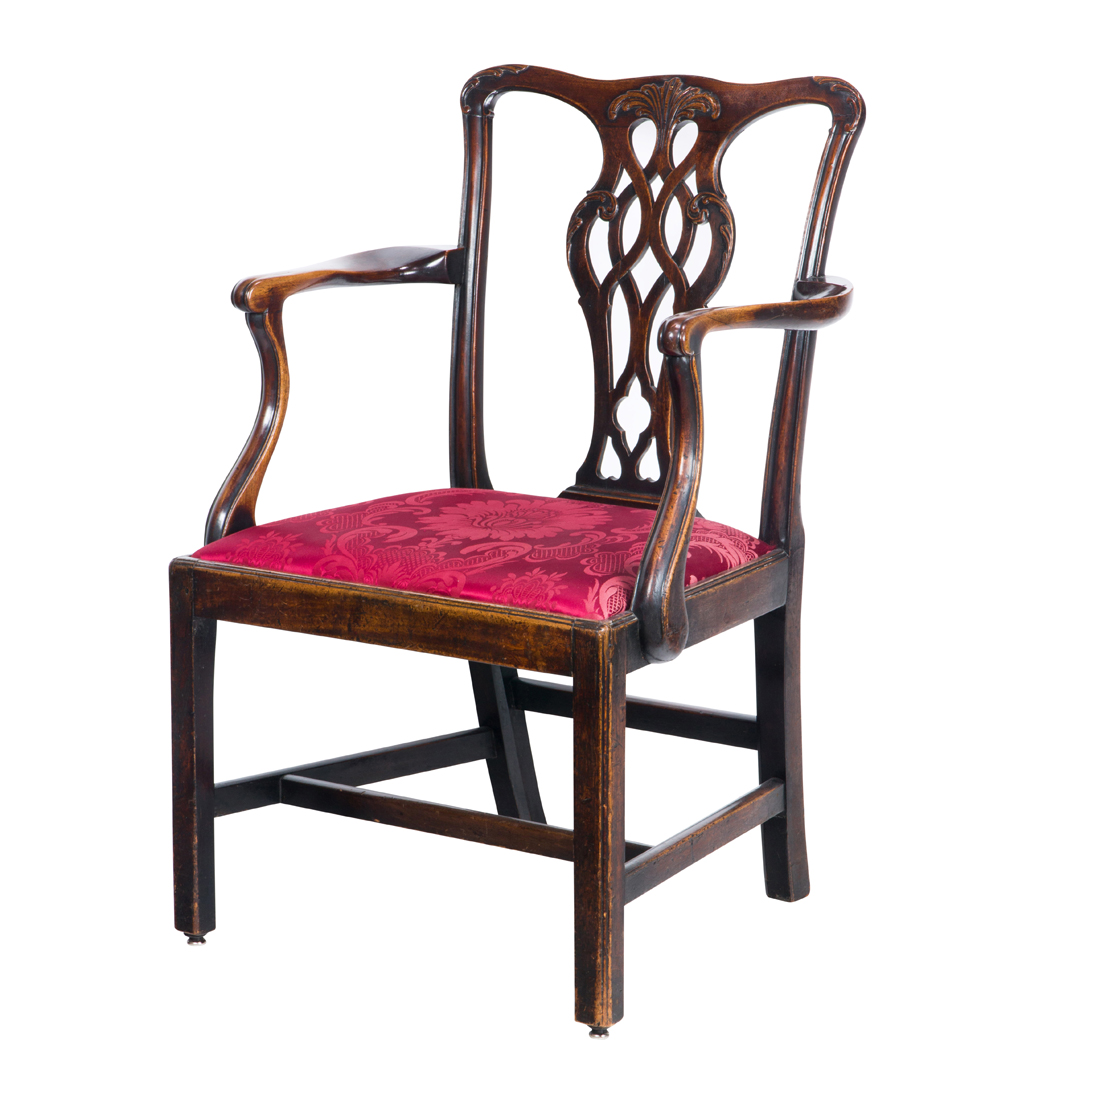 A CHIPPENDALE ARMCHAIR A Chippendale